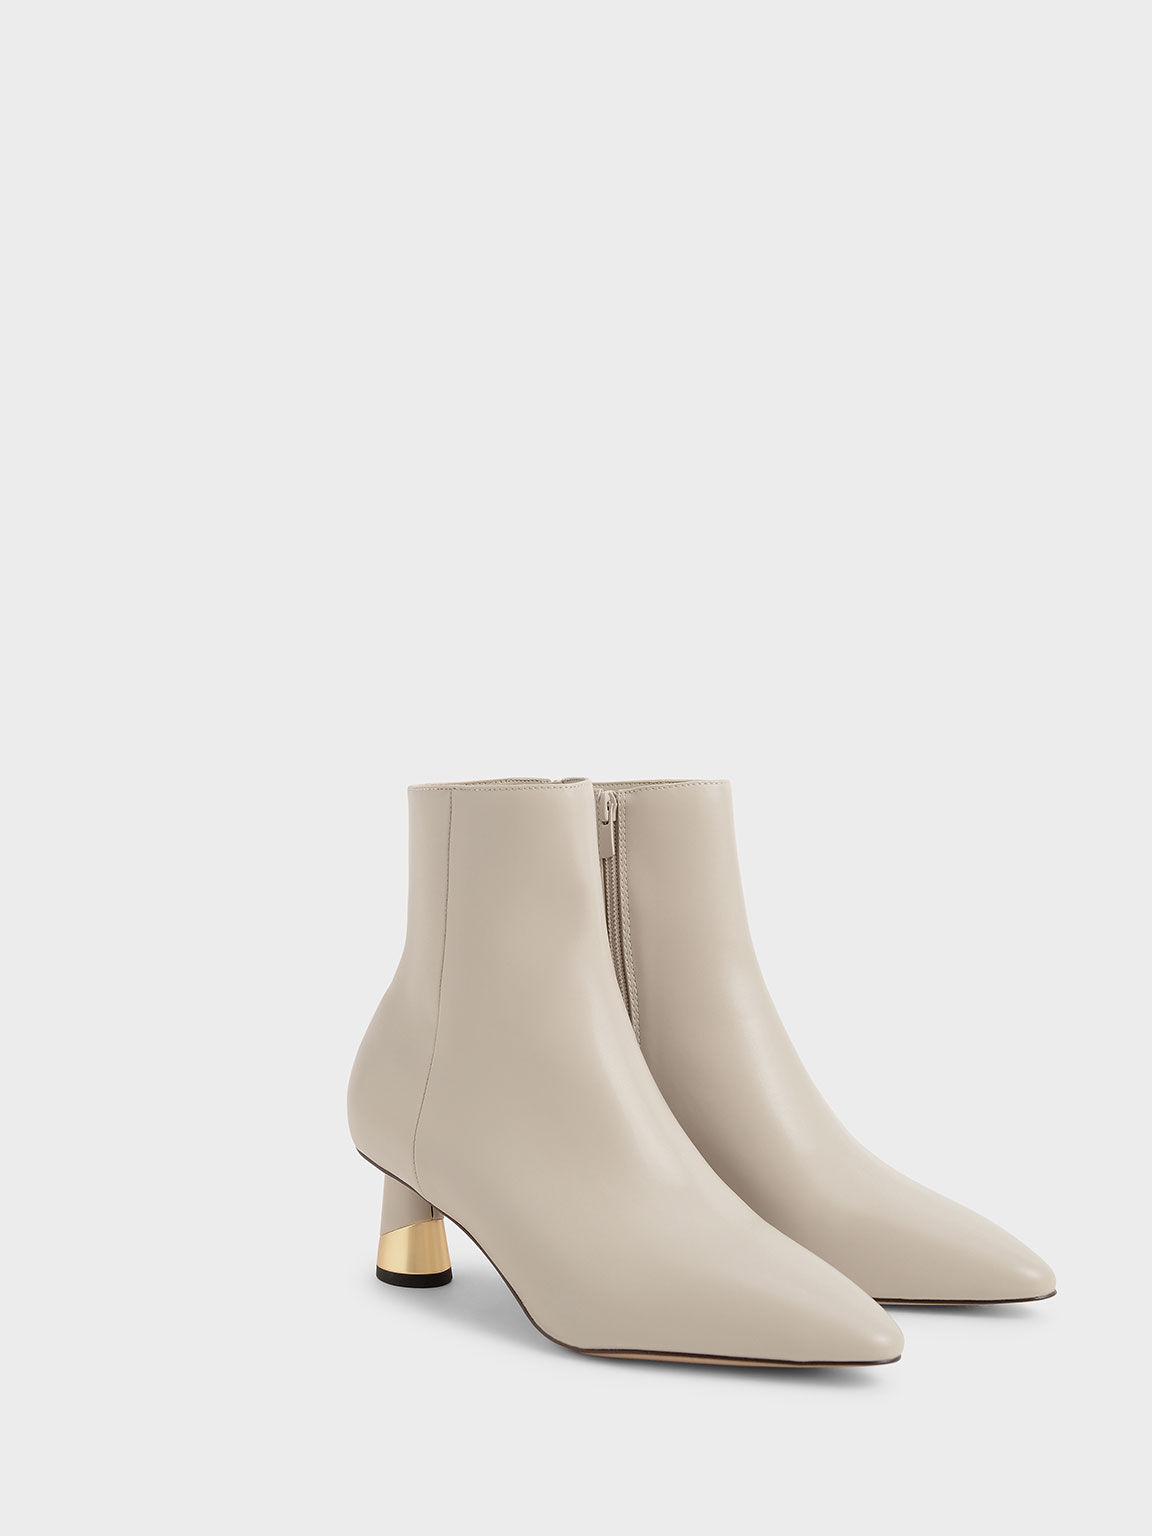 Metallic Accent Ankle Boots, Chalk, hi-res